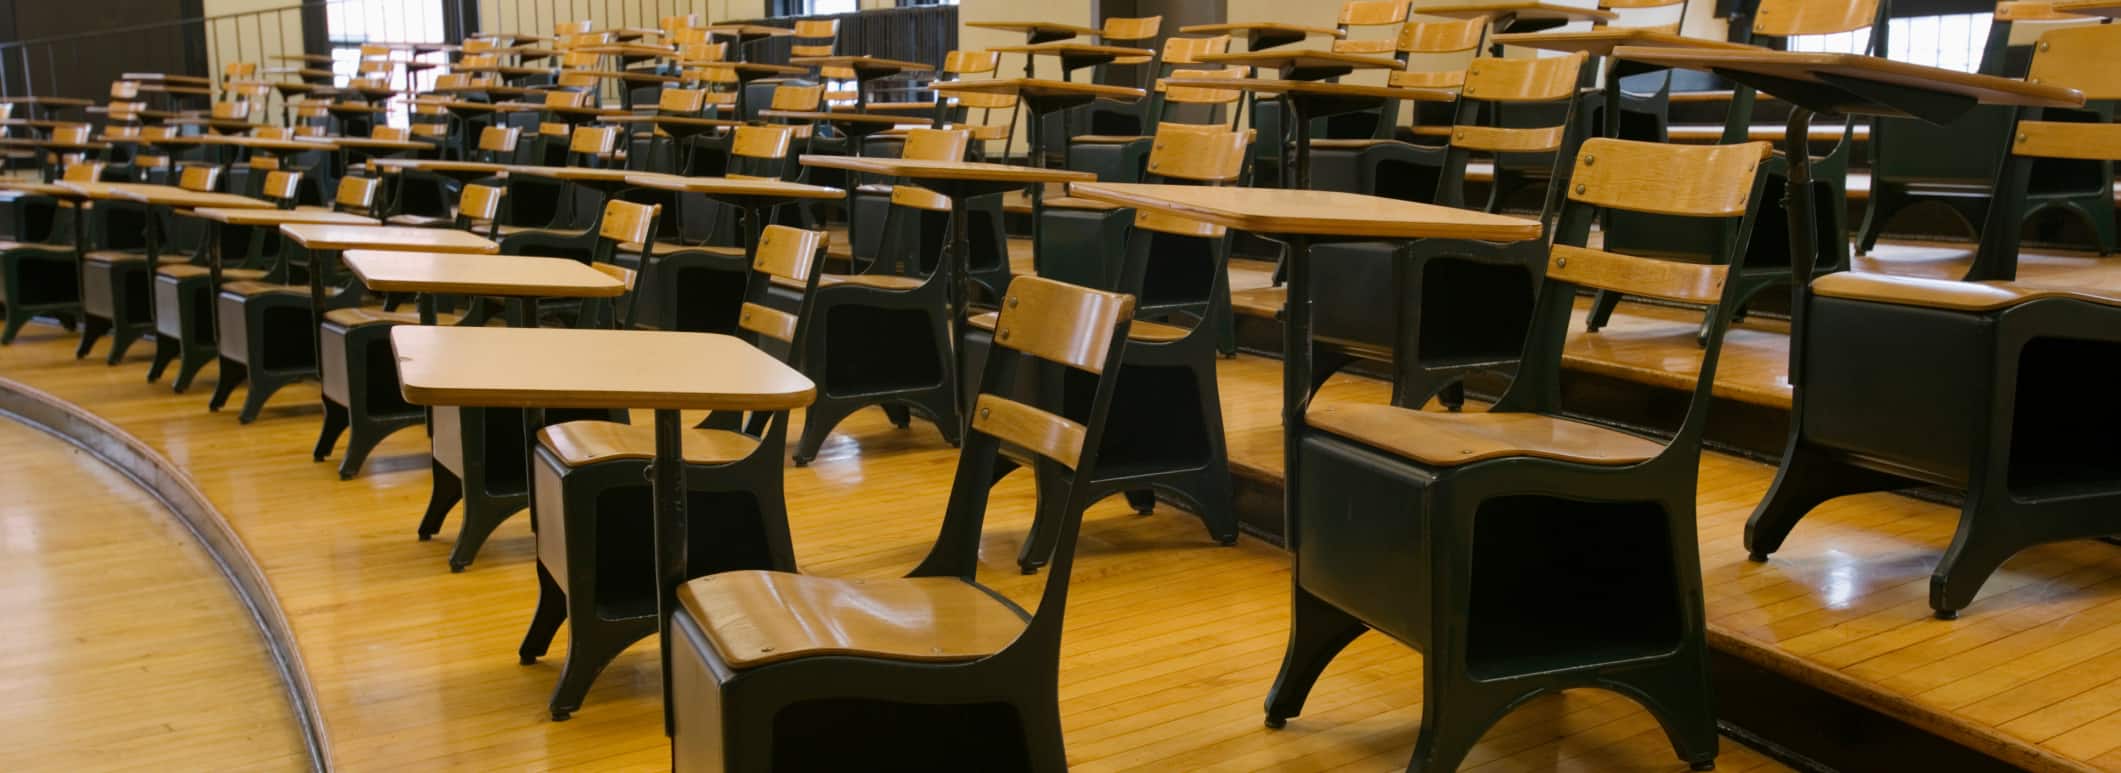 Empty college classroom with black and tan chairs on polished wooden tiers.